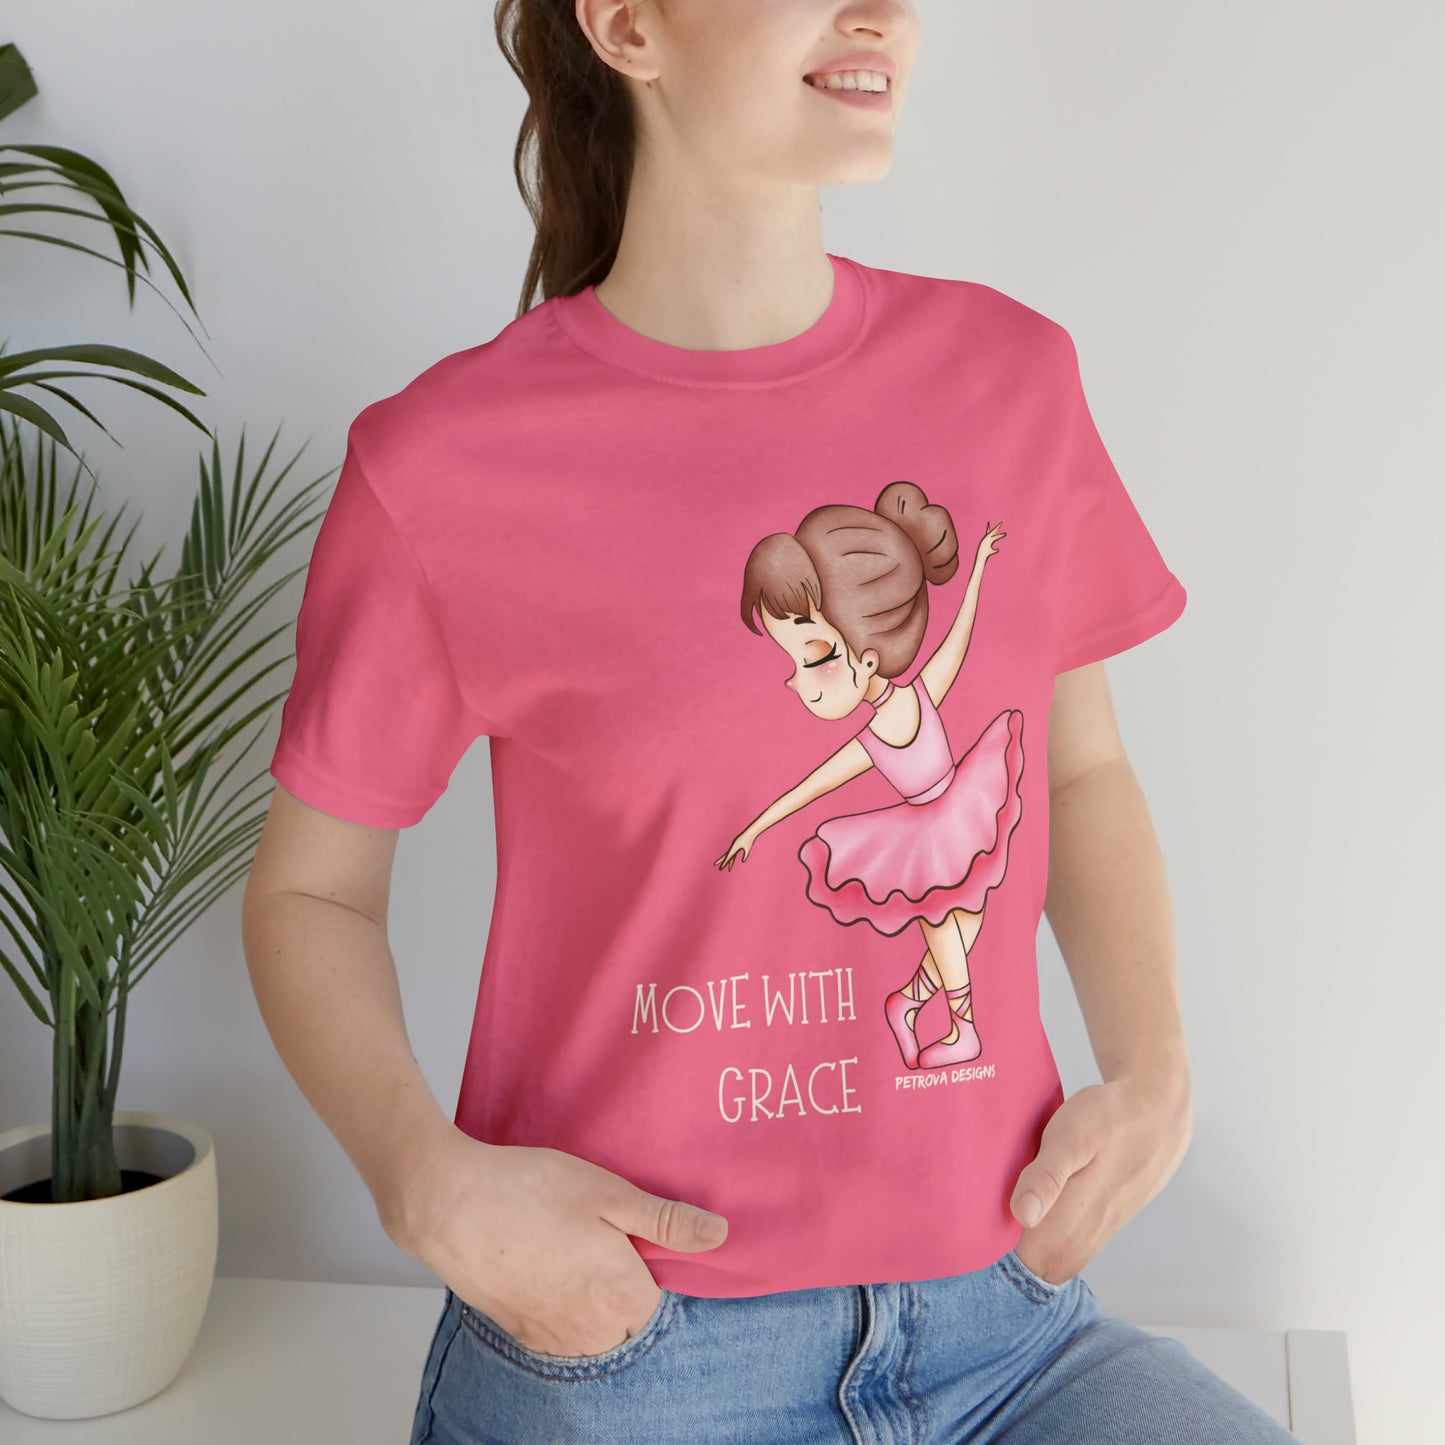 Charity Pink T-Shirt Tshirt Design Gift for Friend and Family Short Sleeved Shirt Petrova Designs